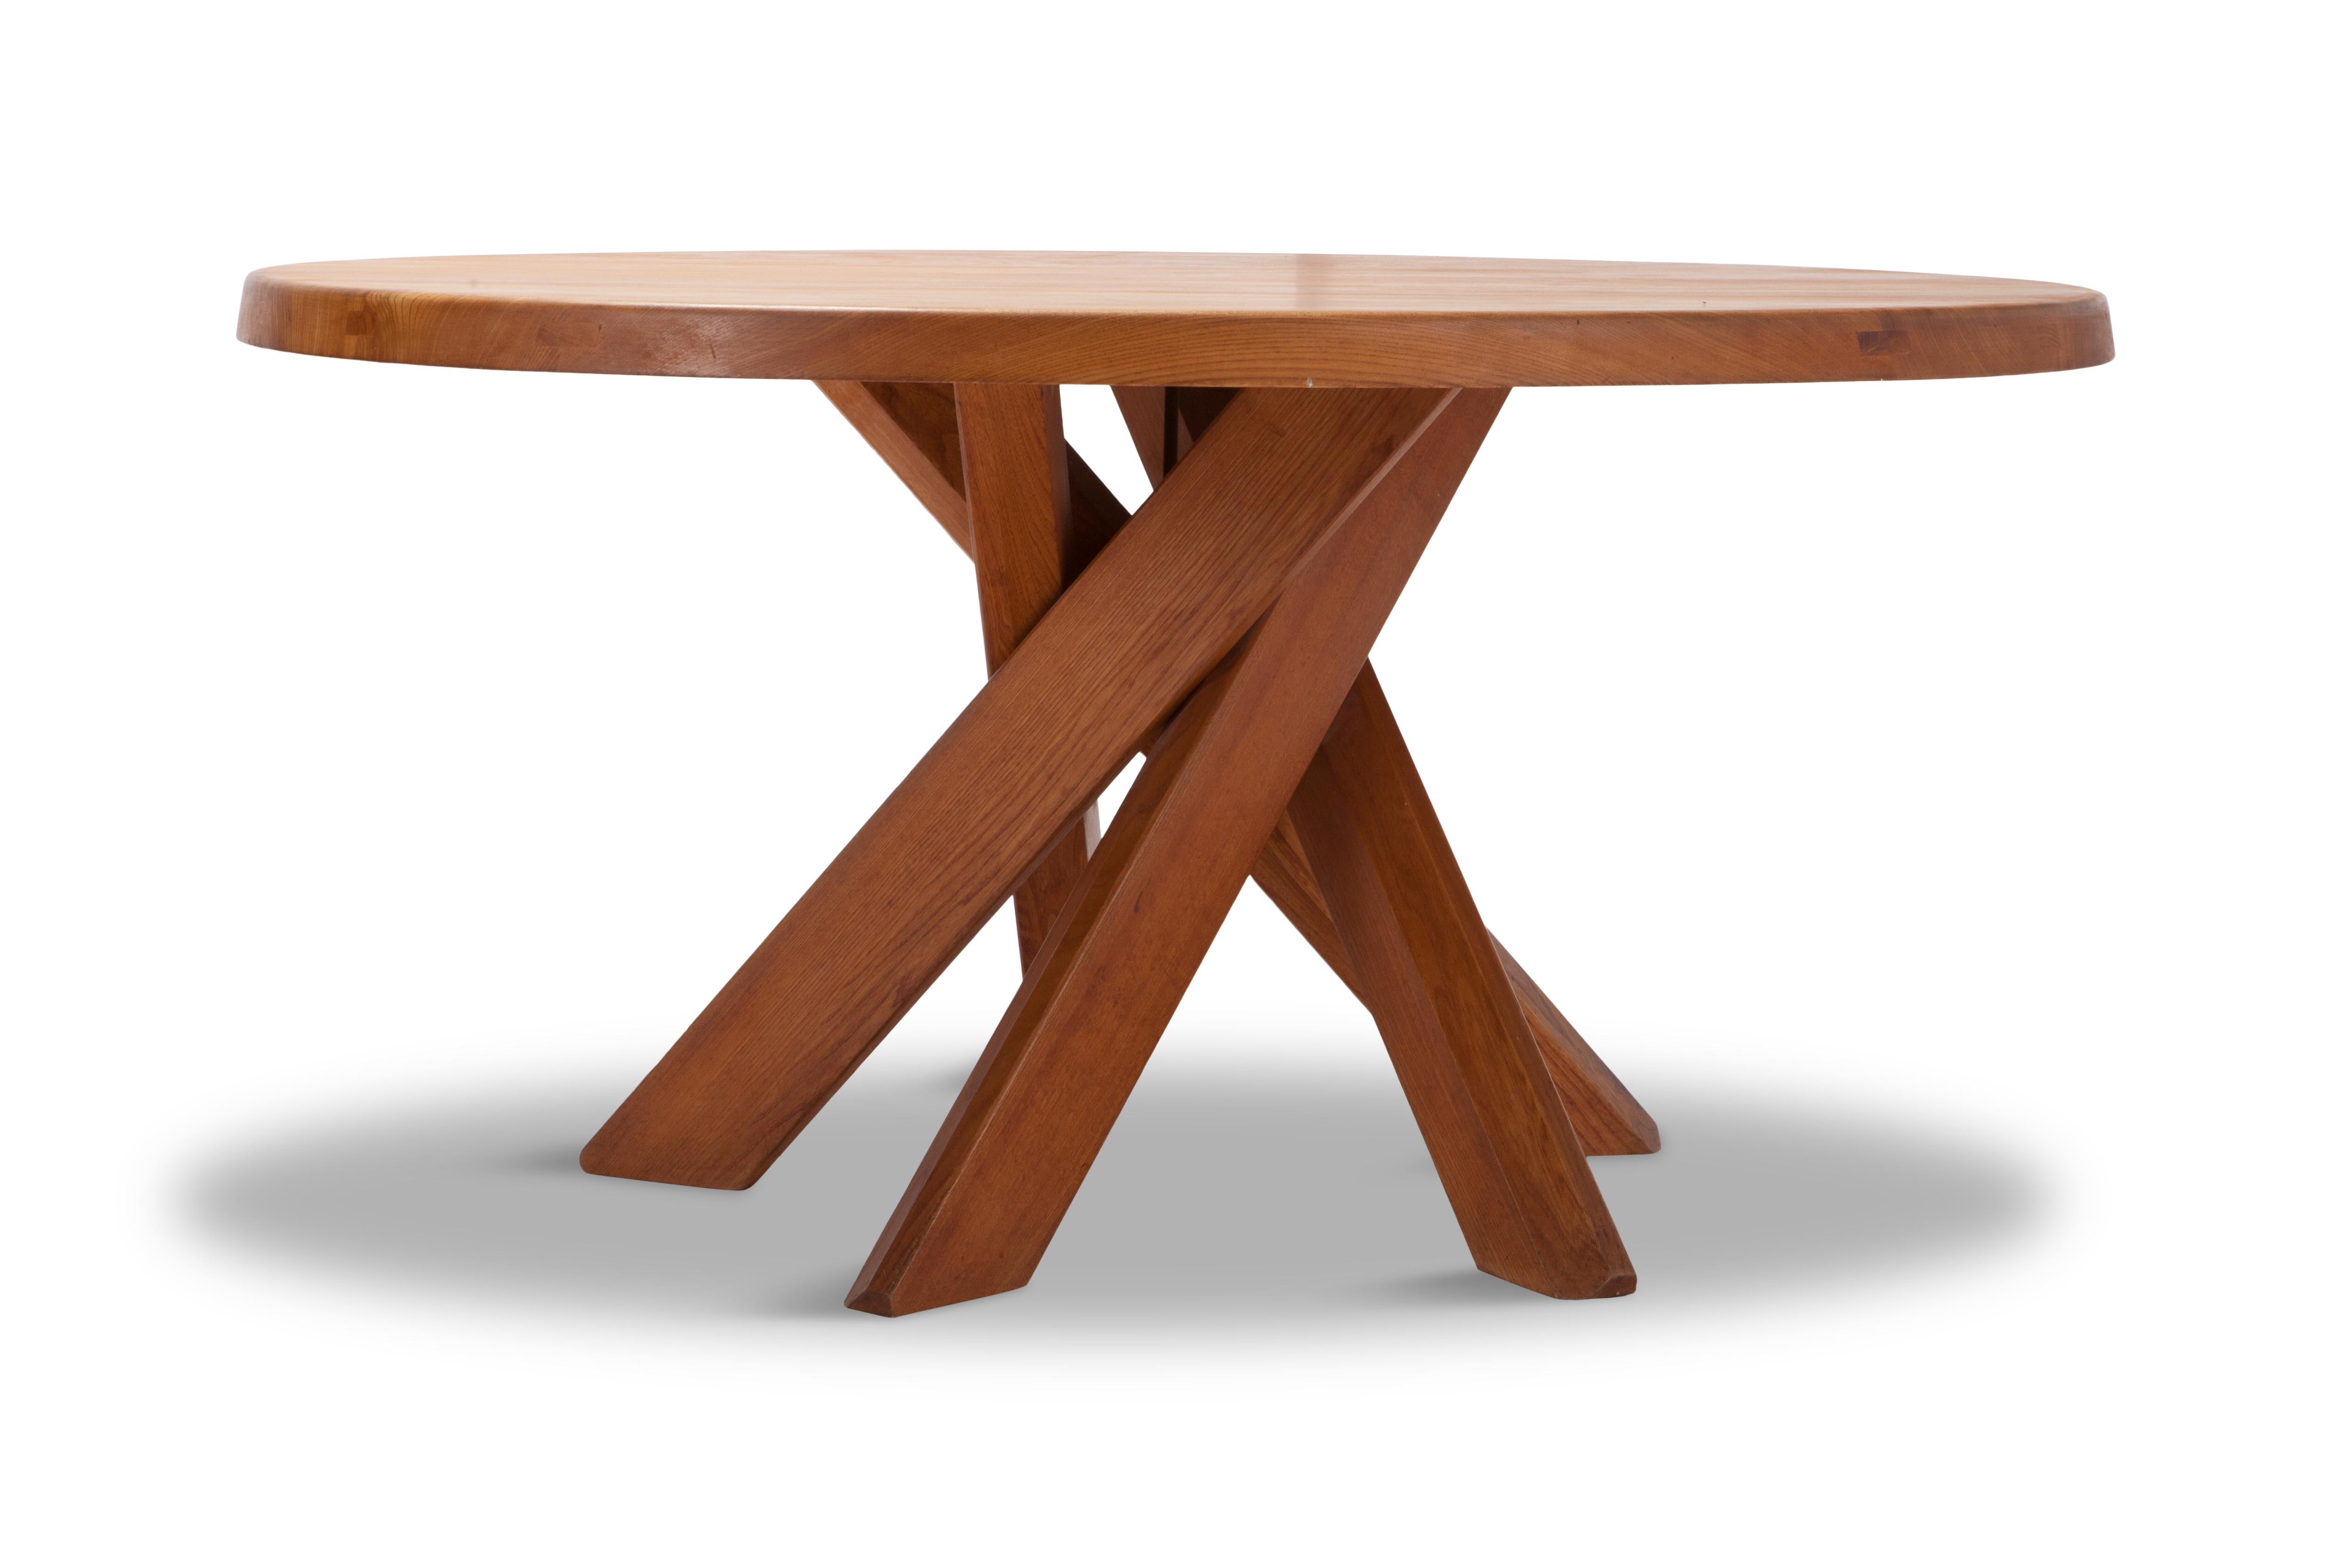 T21 solid French elm dining table in great patinated condition by Pierre Chapo, France, 1960s.

The large round table top shows a beautiful exposed grain providing it with a warm natural appearance. The table top is provided with several cleaver